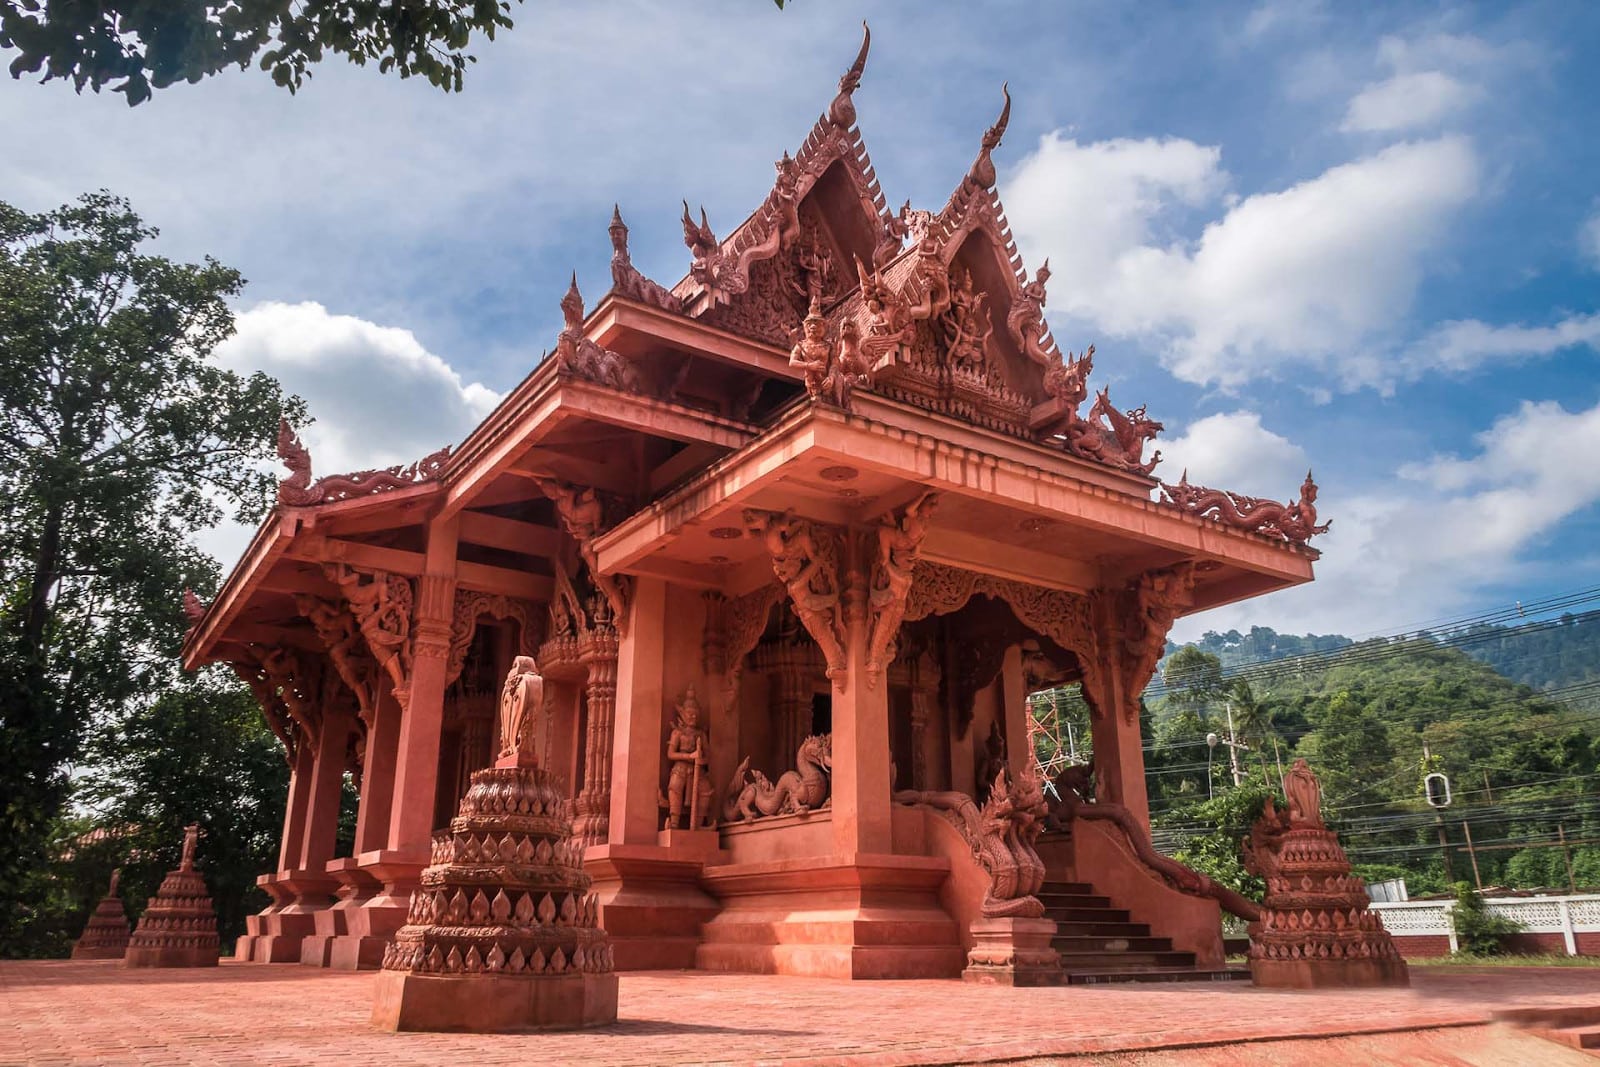 Island’s Attraction. Red Clay Structure of Wat Ratchathammaram